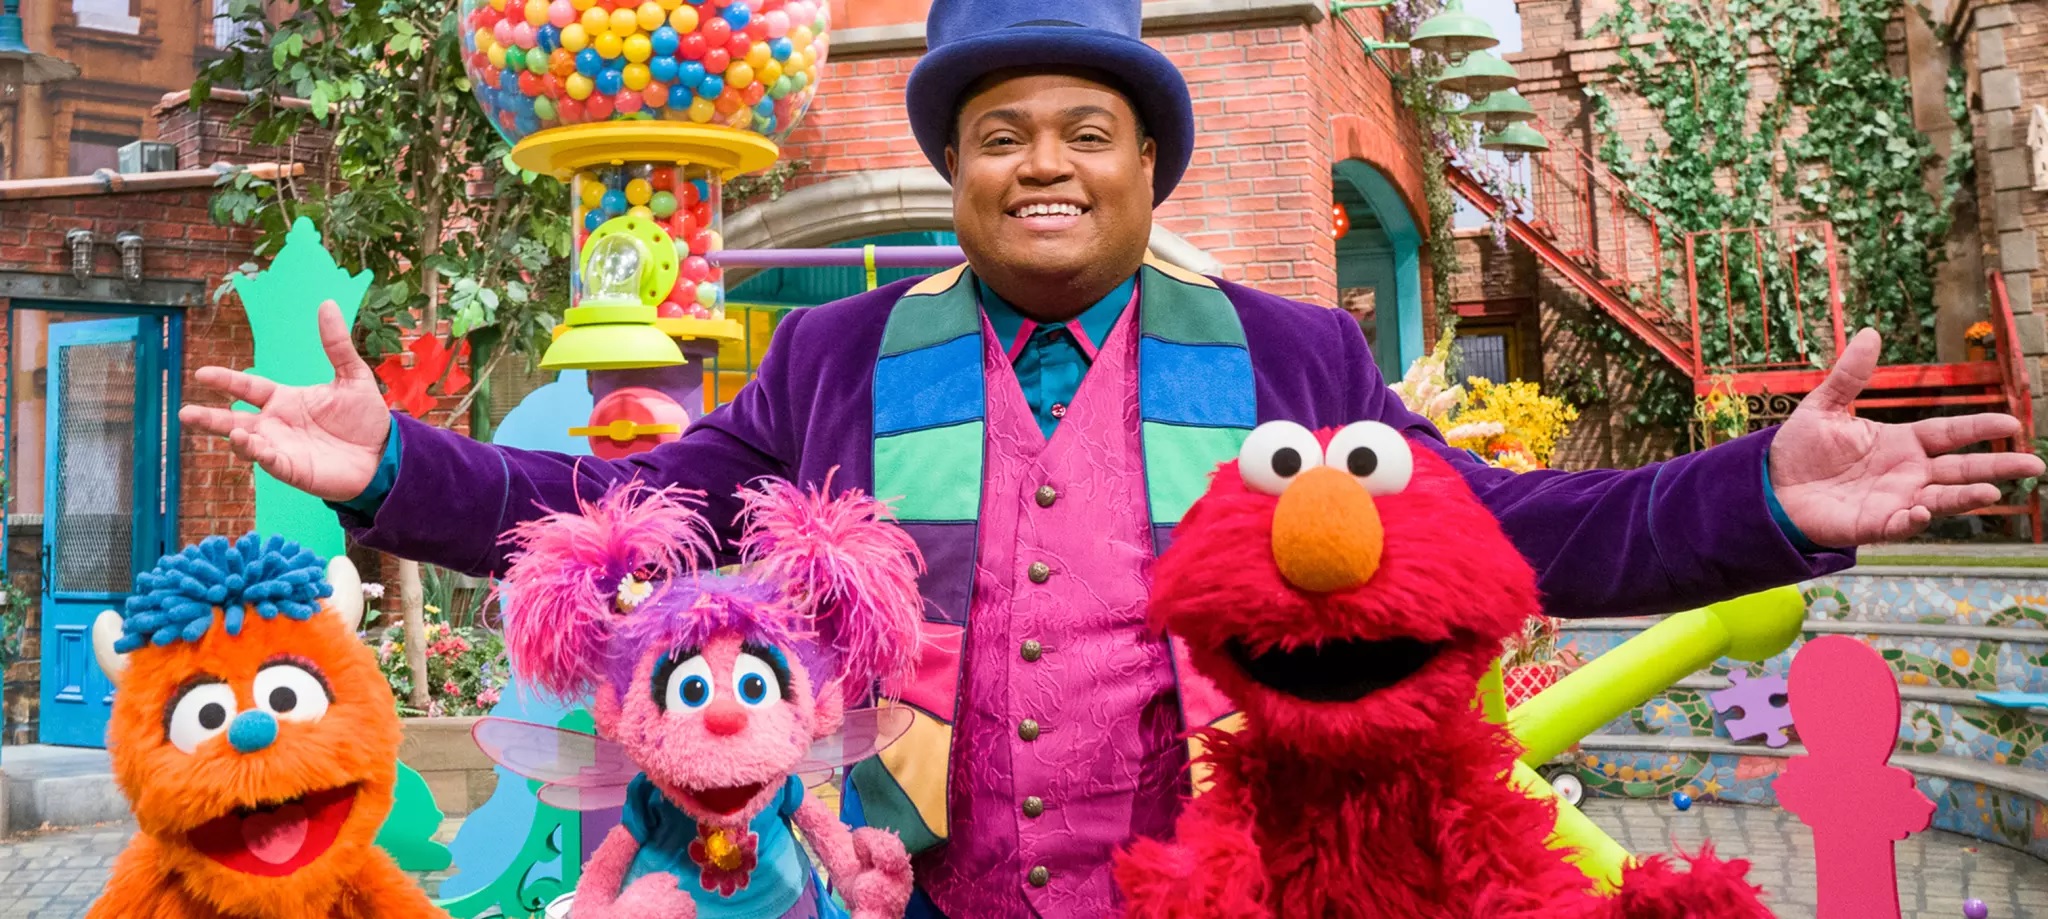 Anything's Possible on Sesame Street: New Details (and Episodes